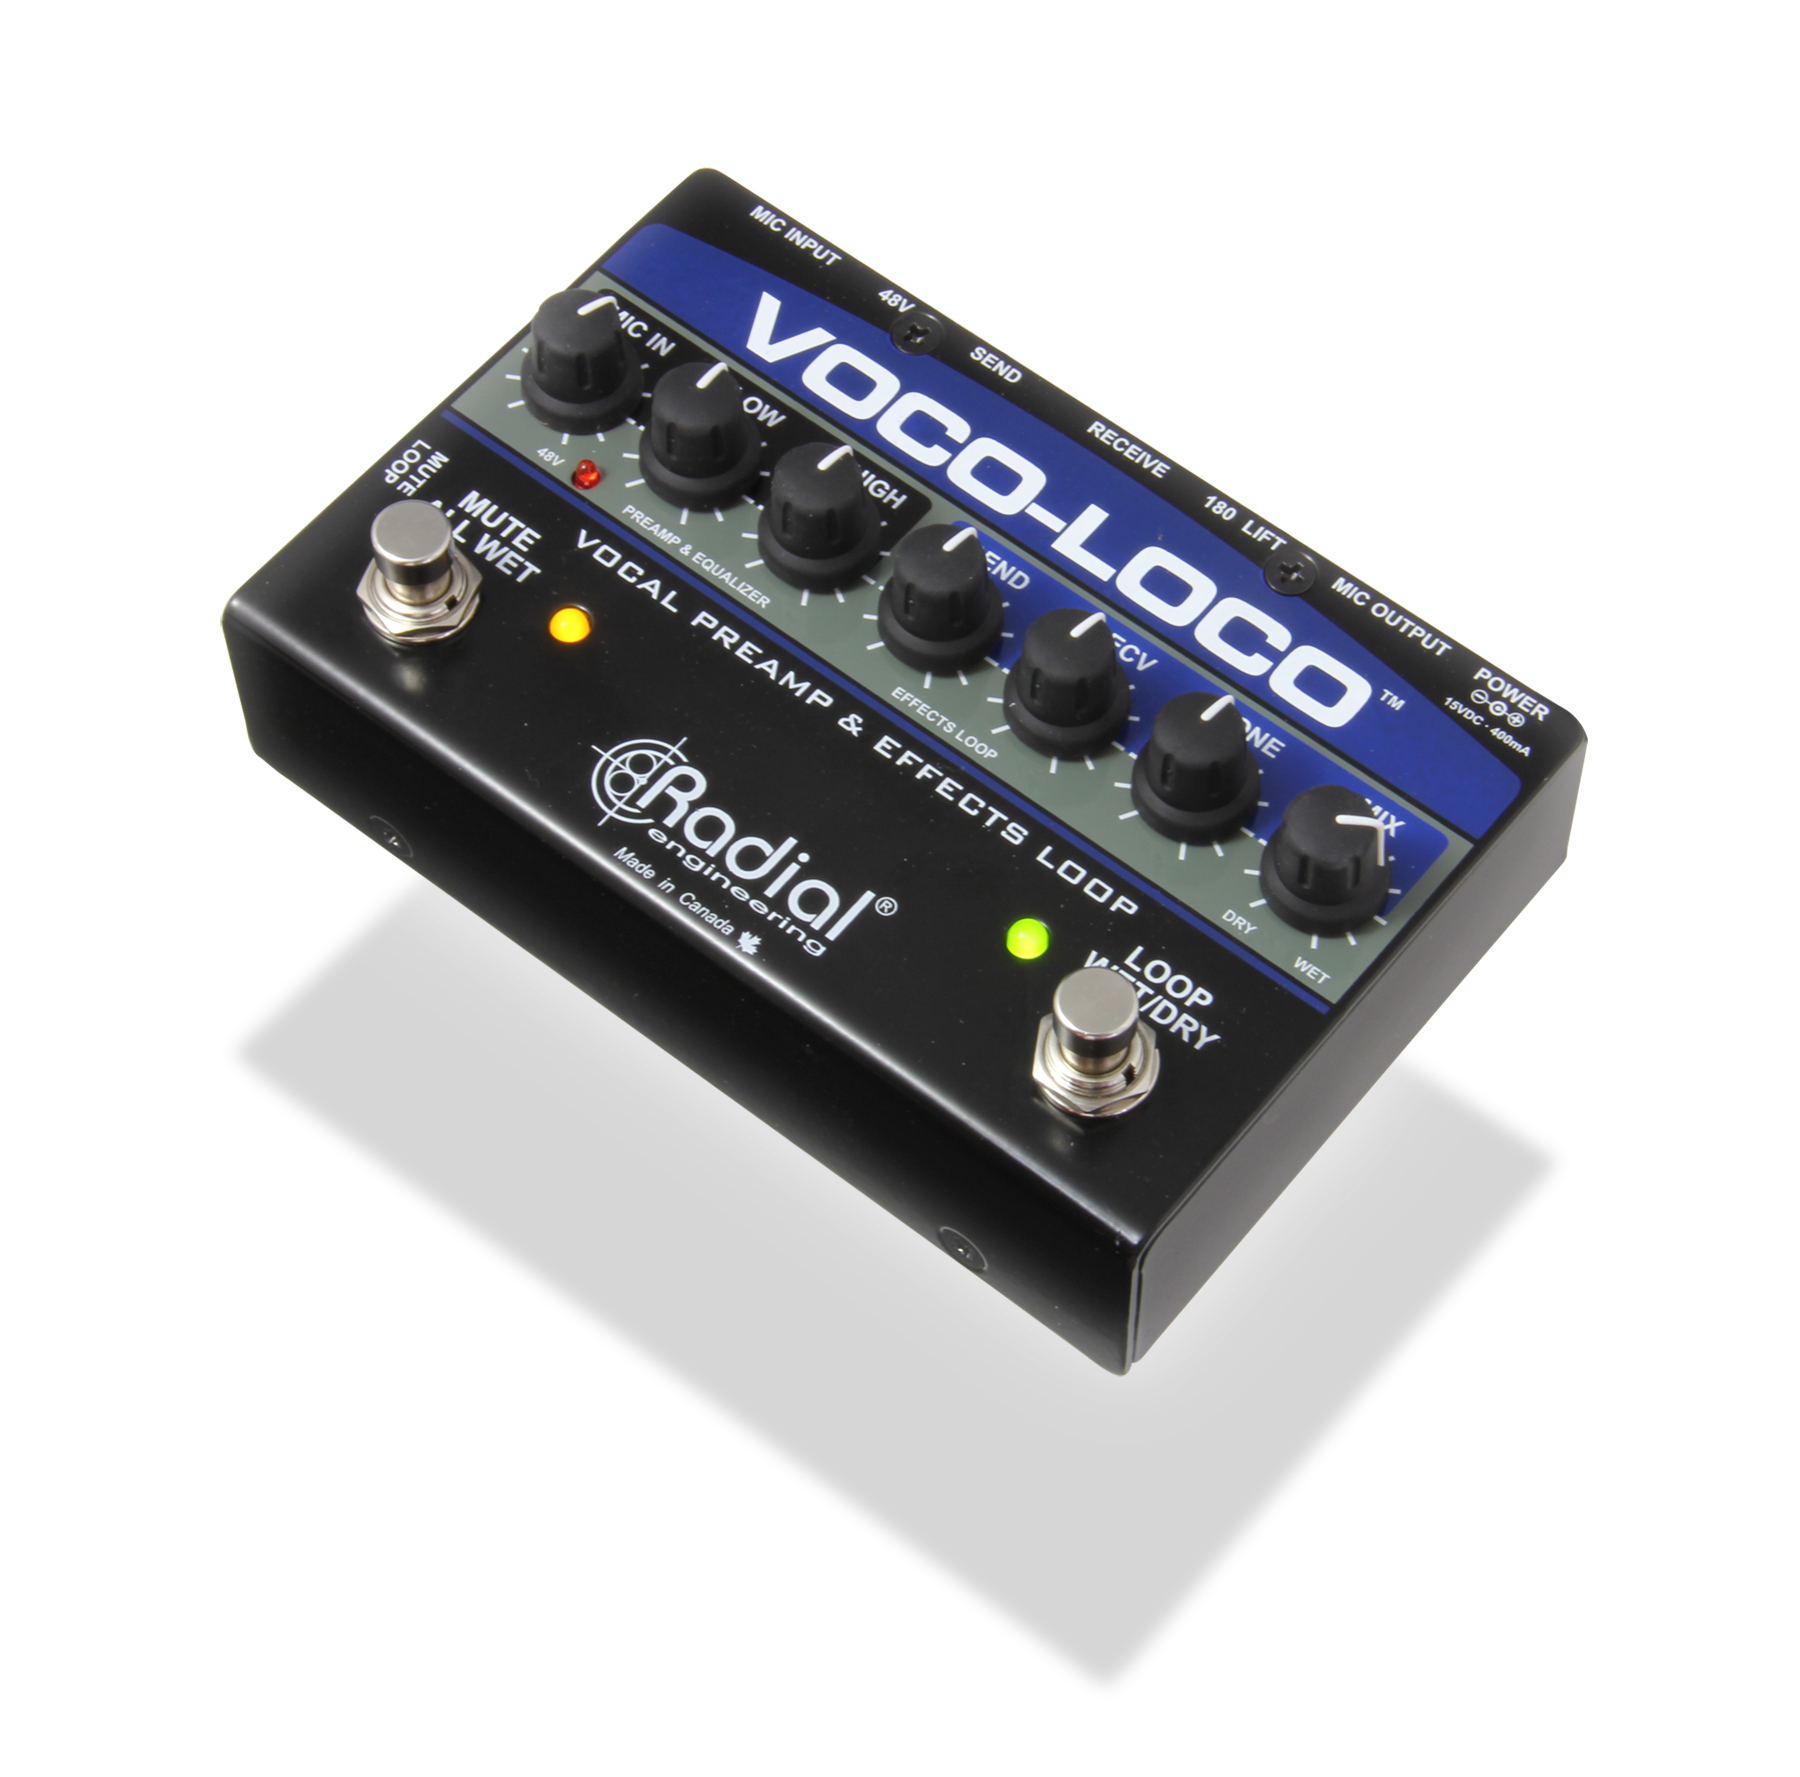 Radial introduces the Voco-Loco™ Mic Preamp and Effects